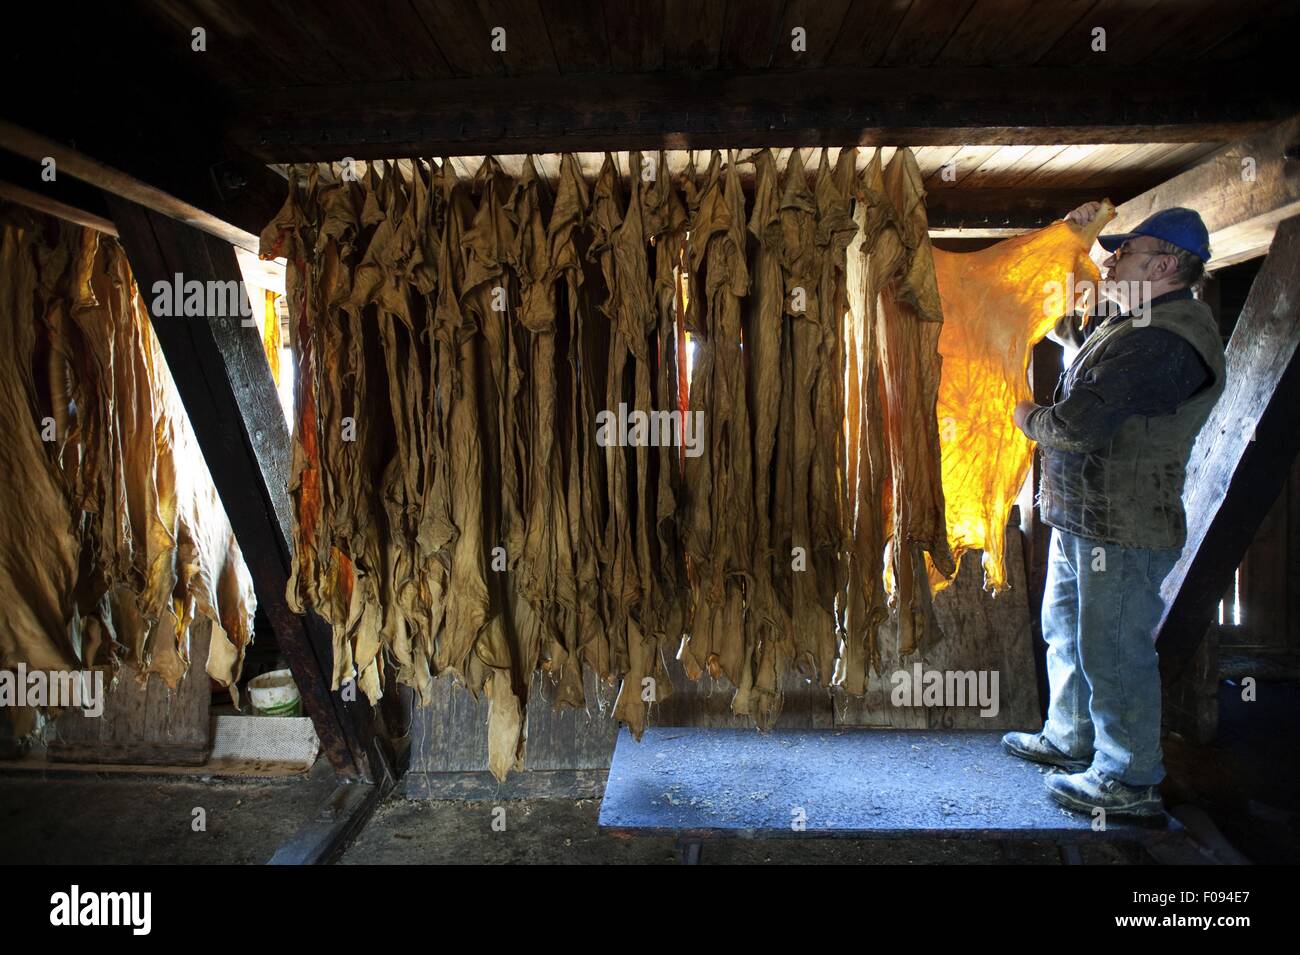 Tanner leather hides hanged in Ulrich, Augsburg, Germany Stock Photo